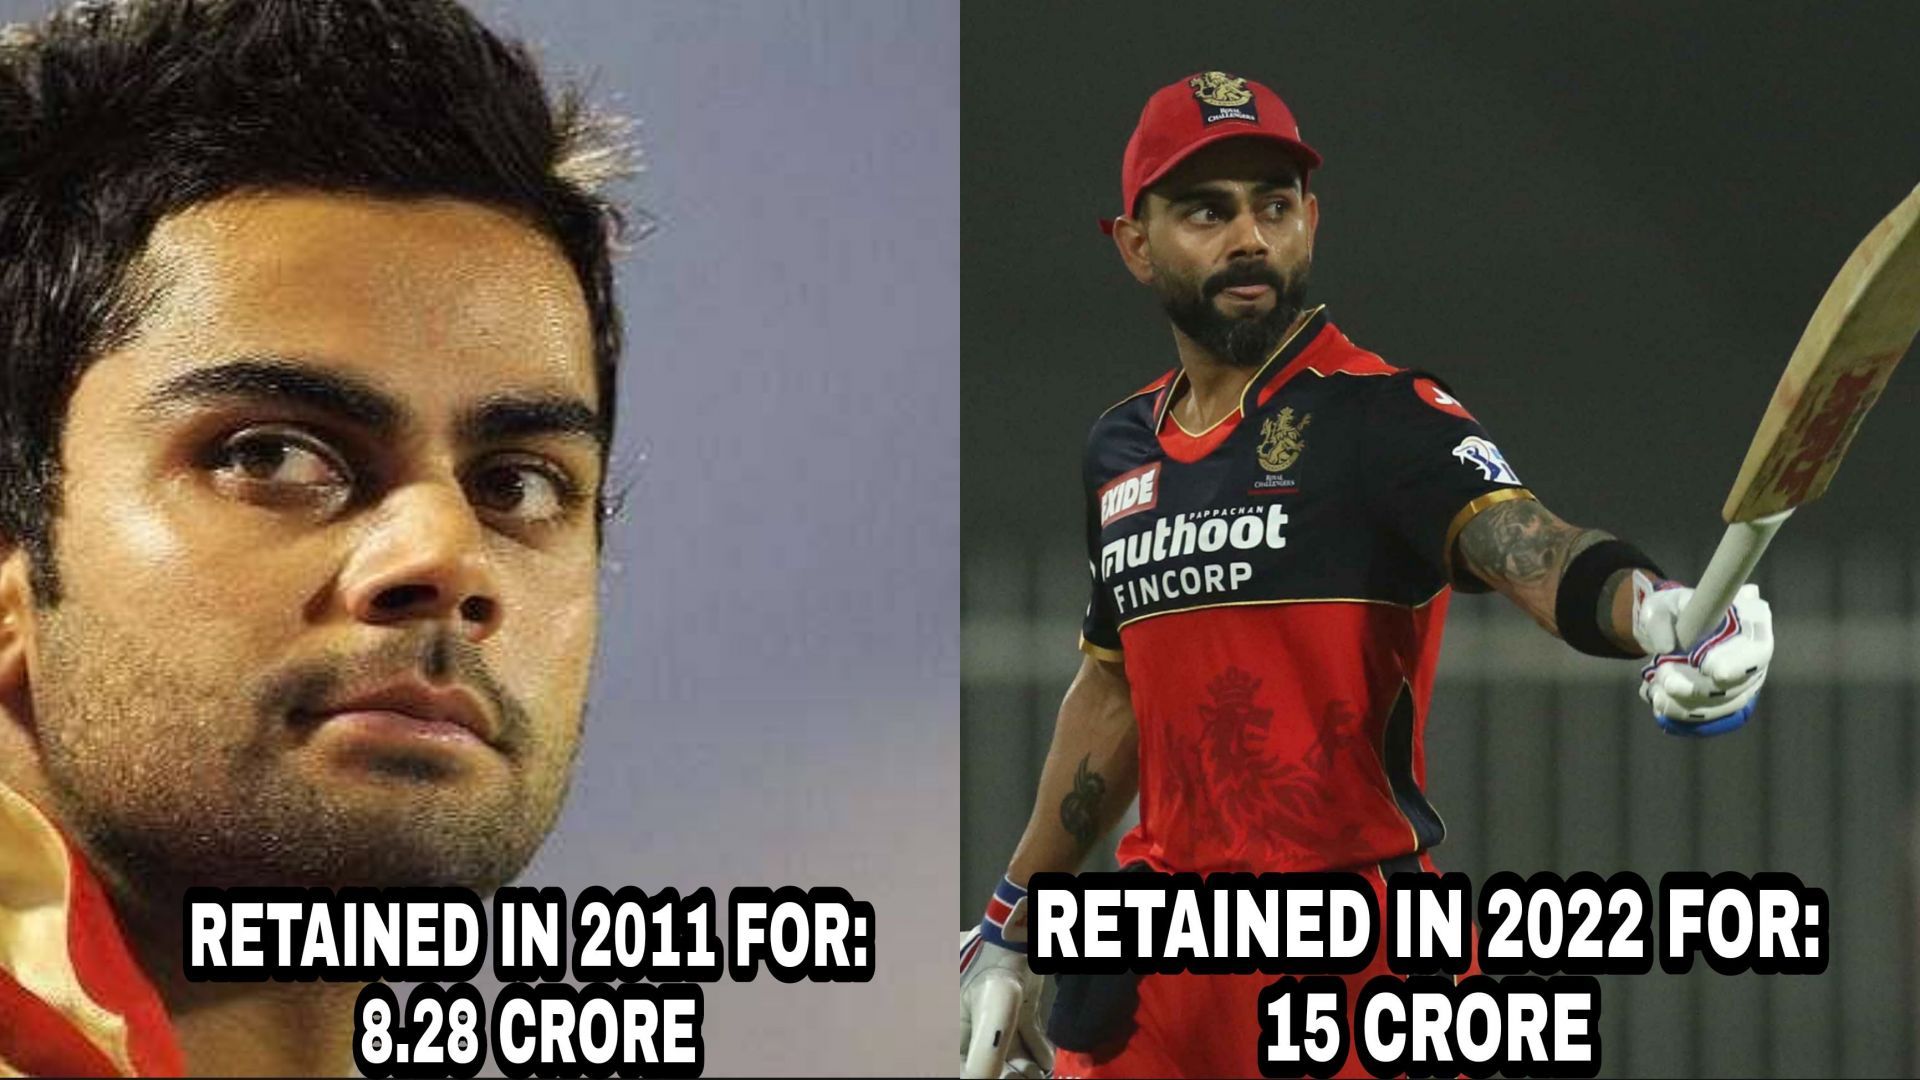 Virat Kohli was the only player retained by Royal Challengers Bangalore ahead of IPL Auction 2011